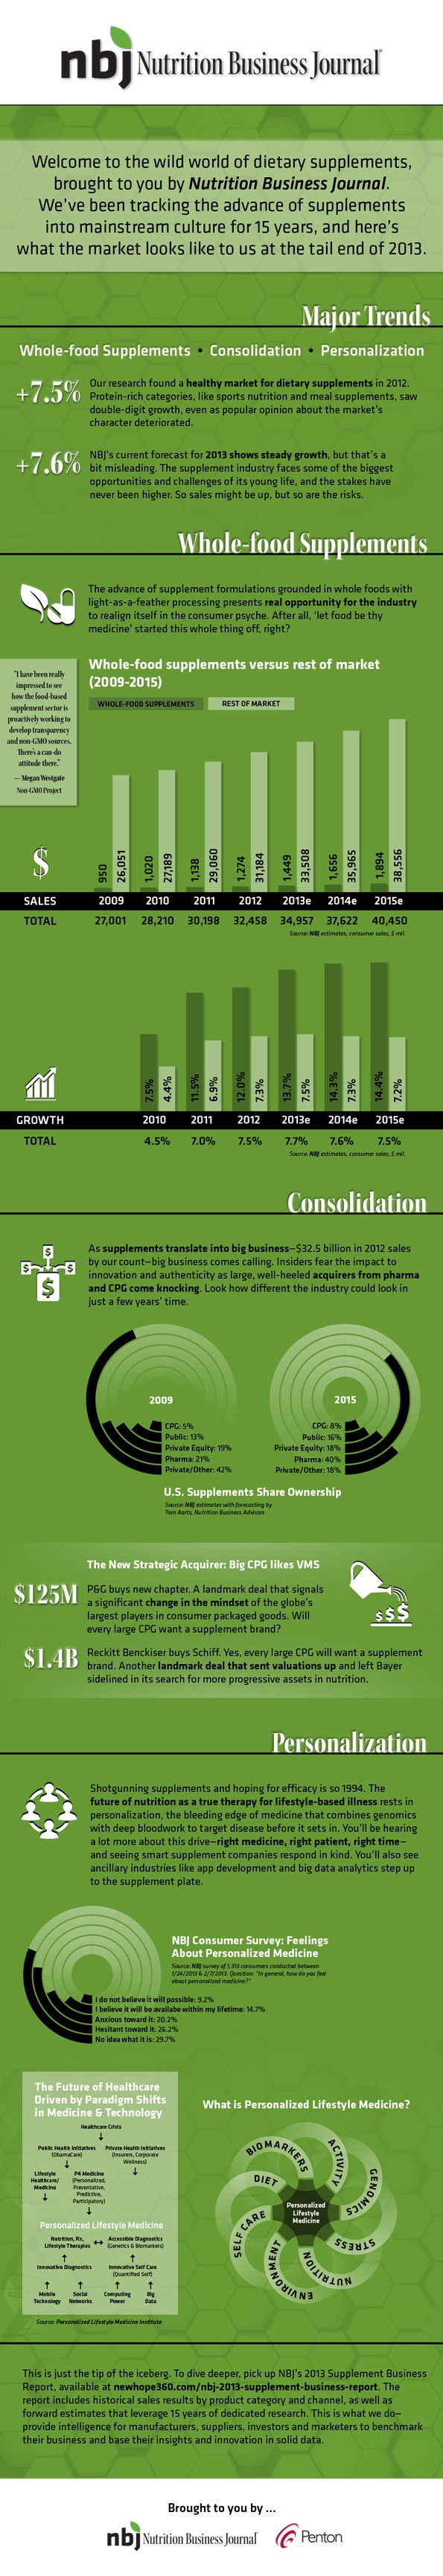 Infographic: Highlights from the 2013 Supplement Business Report